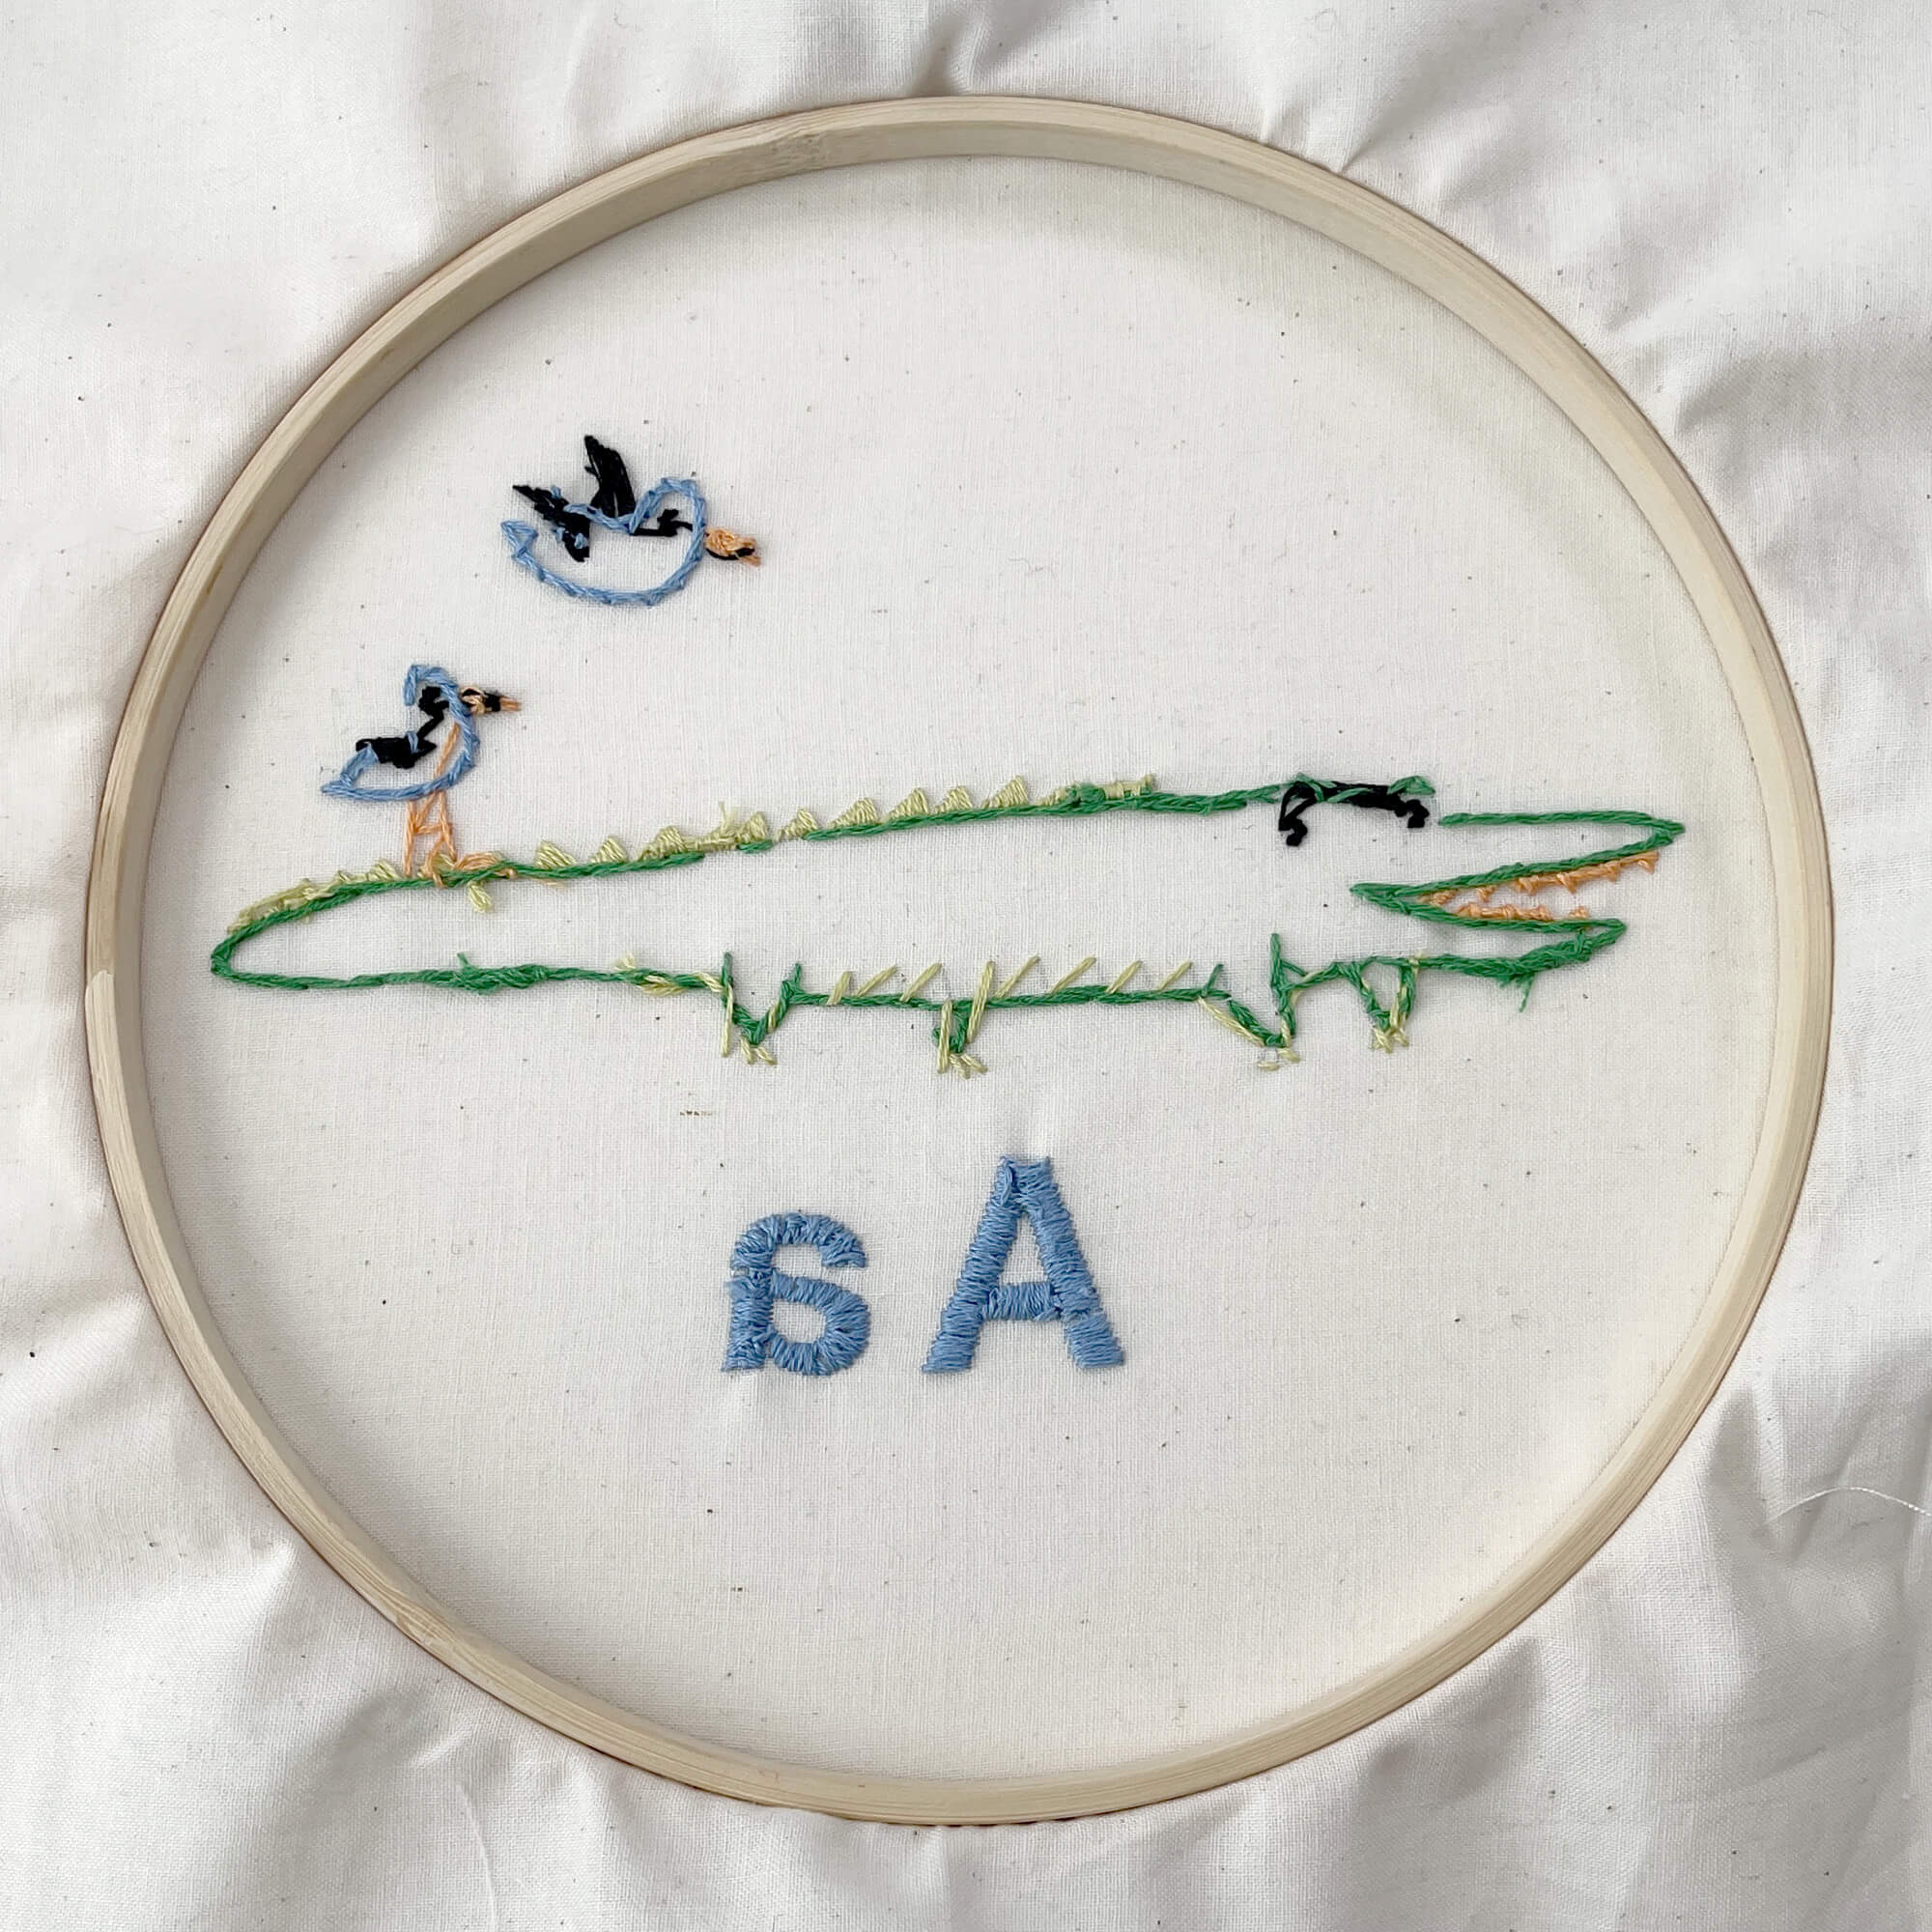 A clean back of an embroidery project